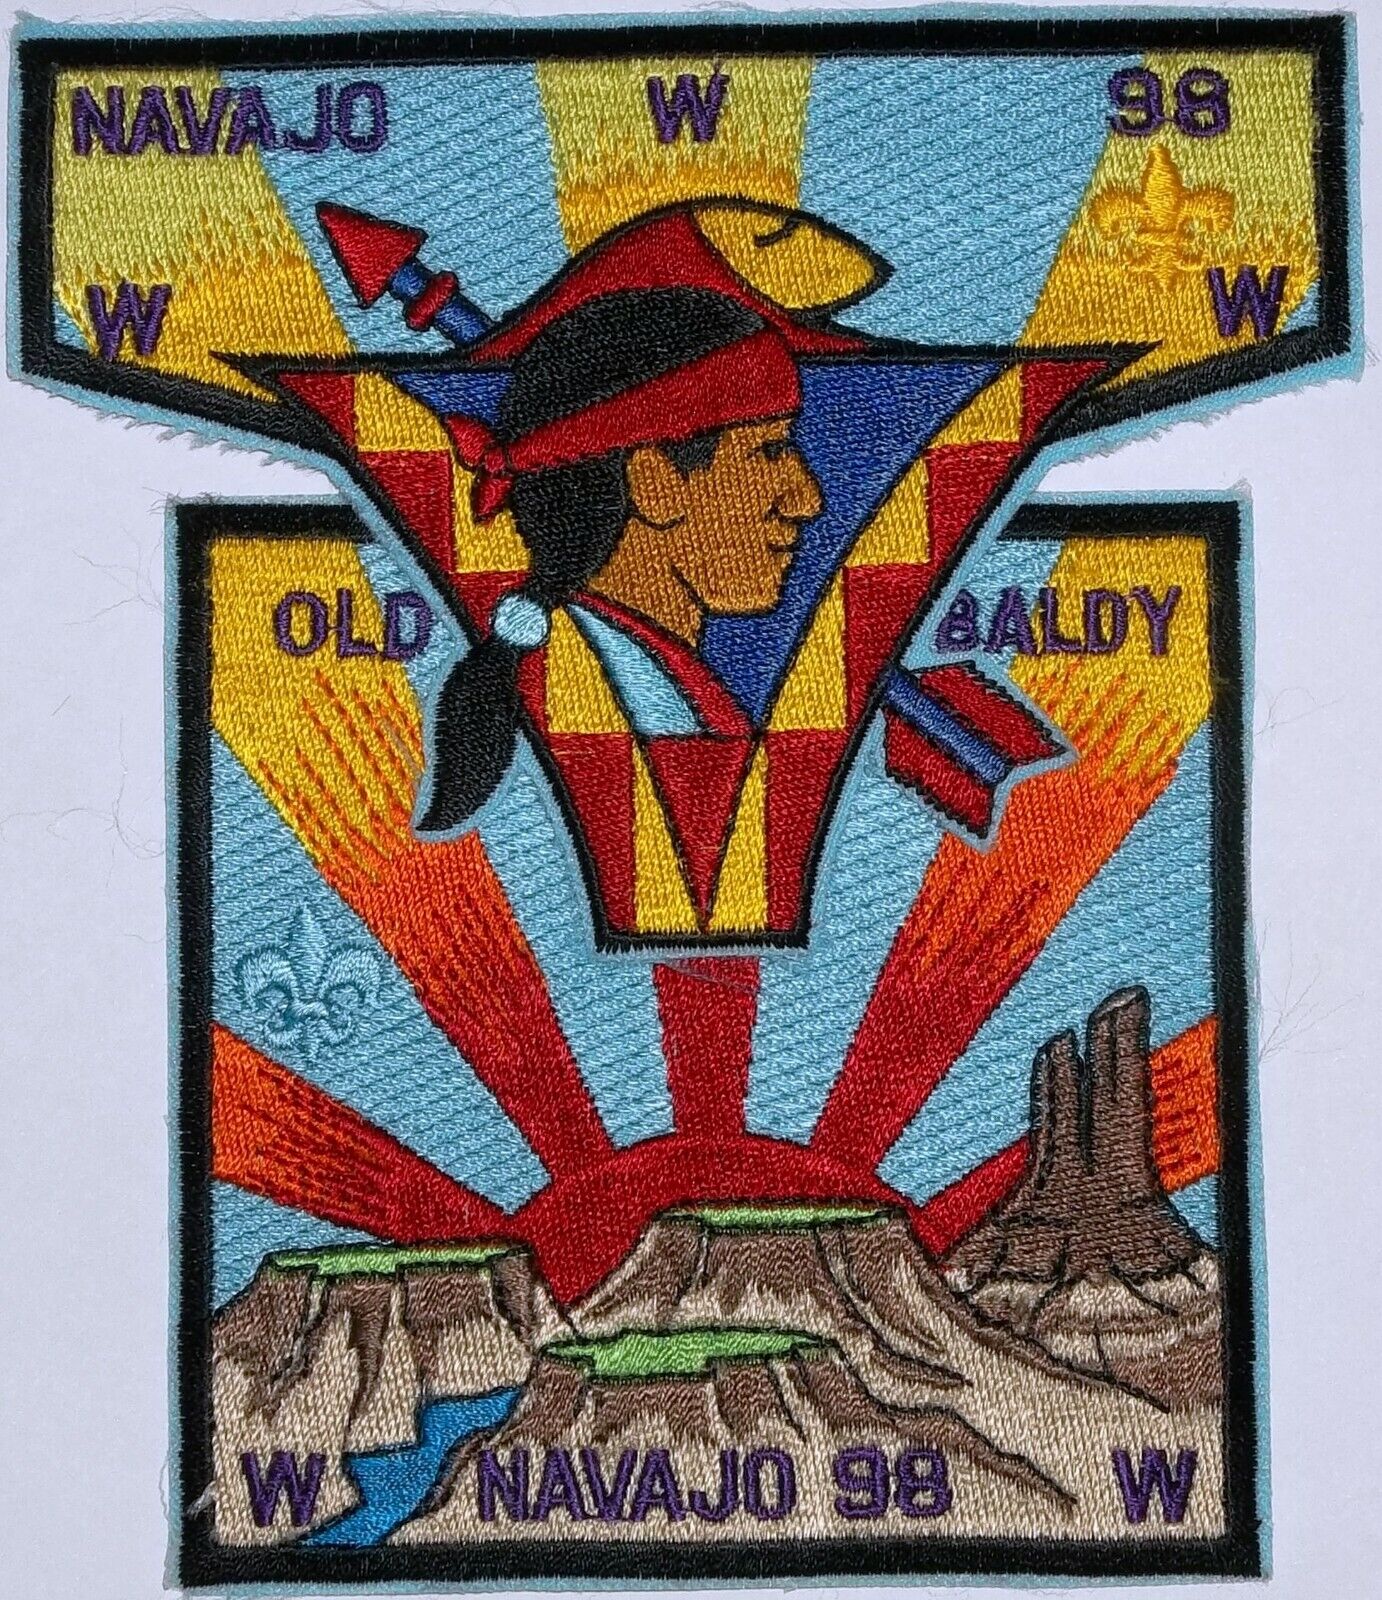 MERGED OA NAVAJO LODGE 98 BSA OLD BALDY COUNCIL CALIFORNIA FLAP 2-PATCH INDIAN